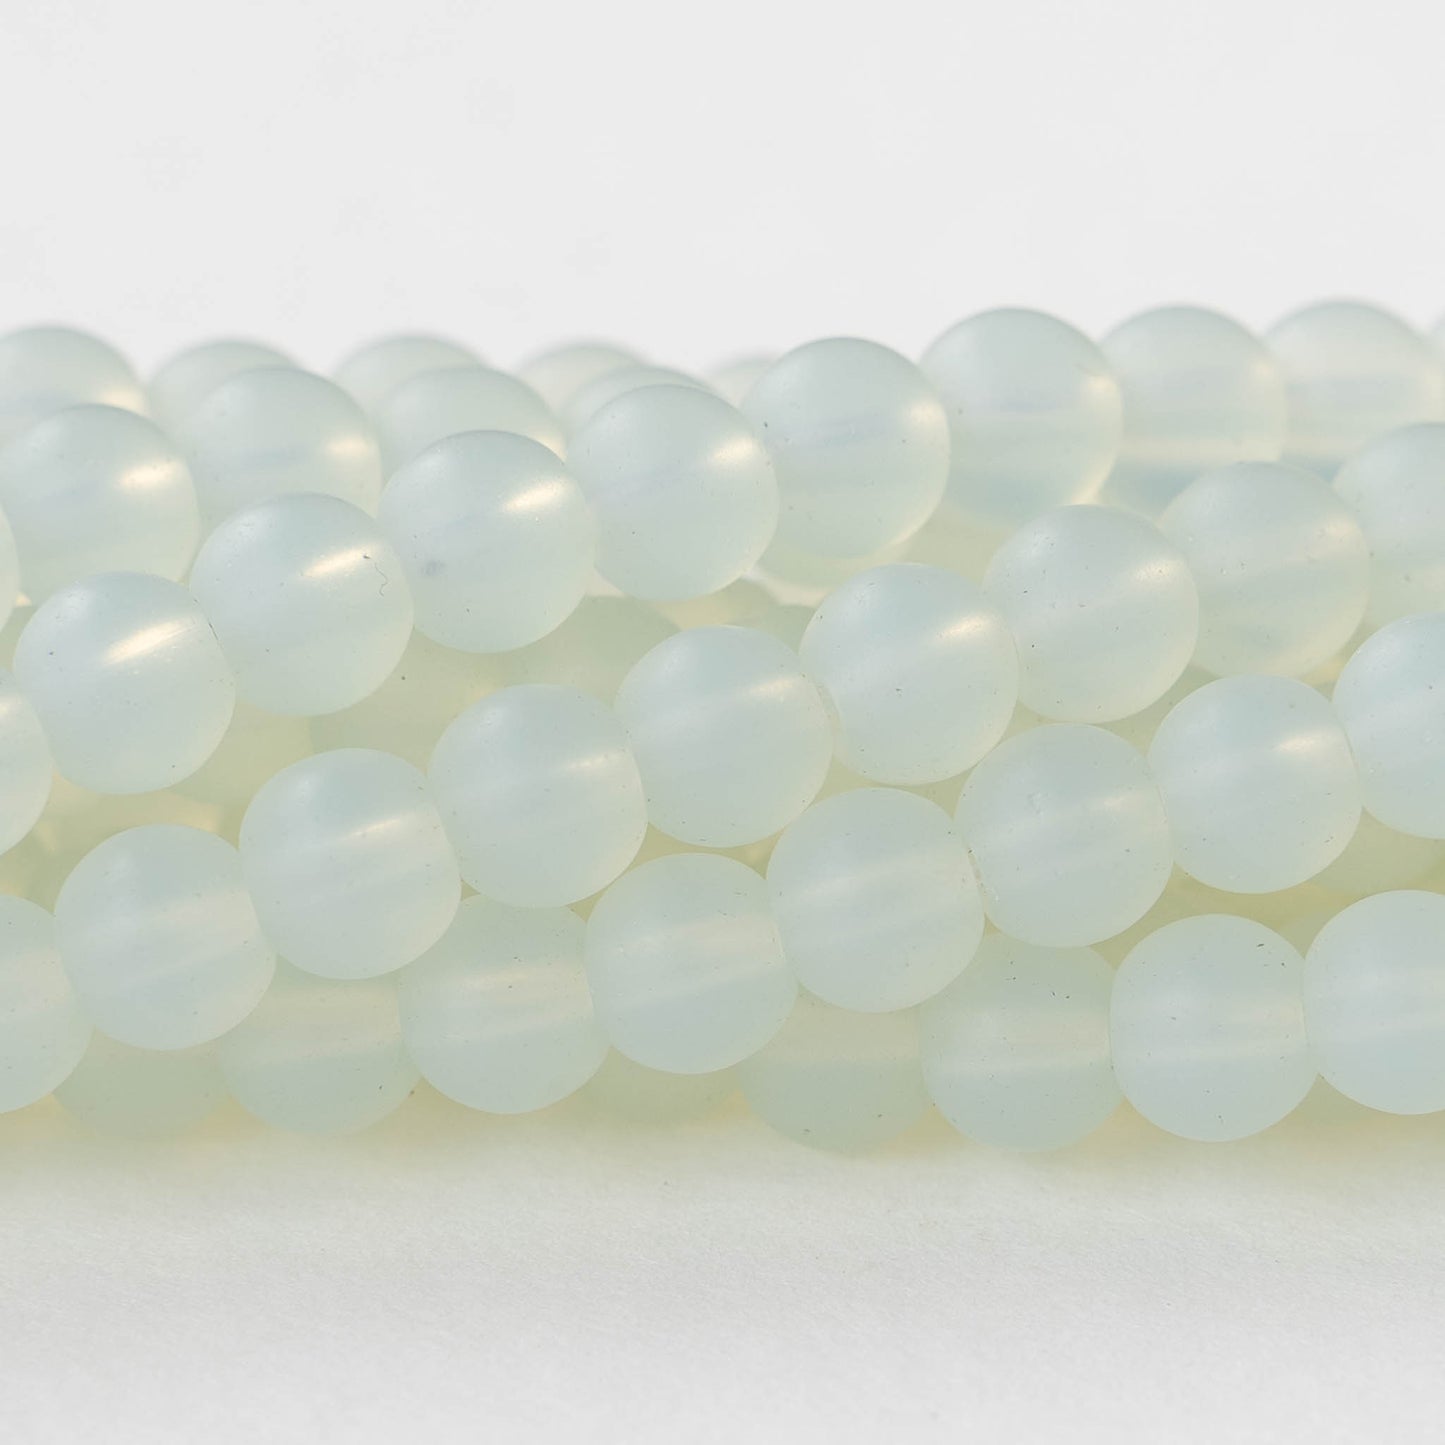 6mm Frosted Glass Rounds - Moonstone Opal - 16 Inches